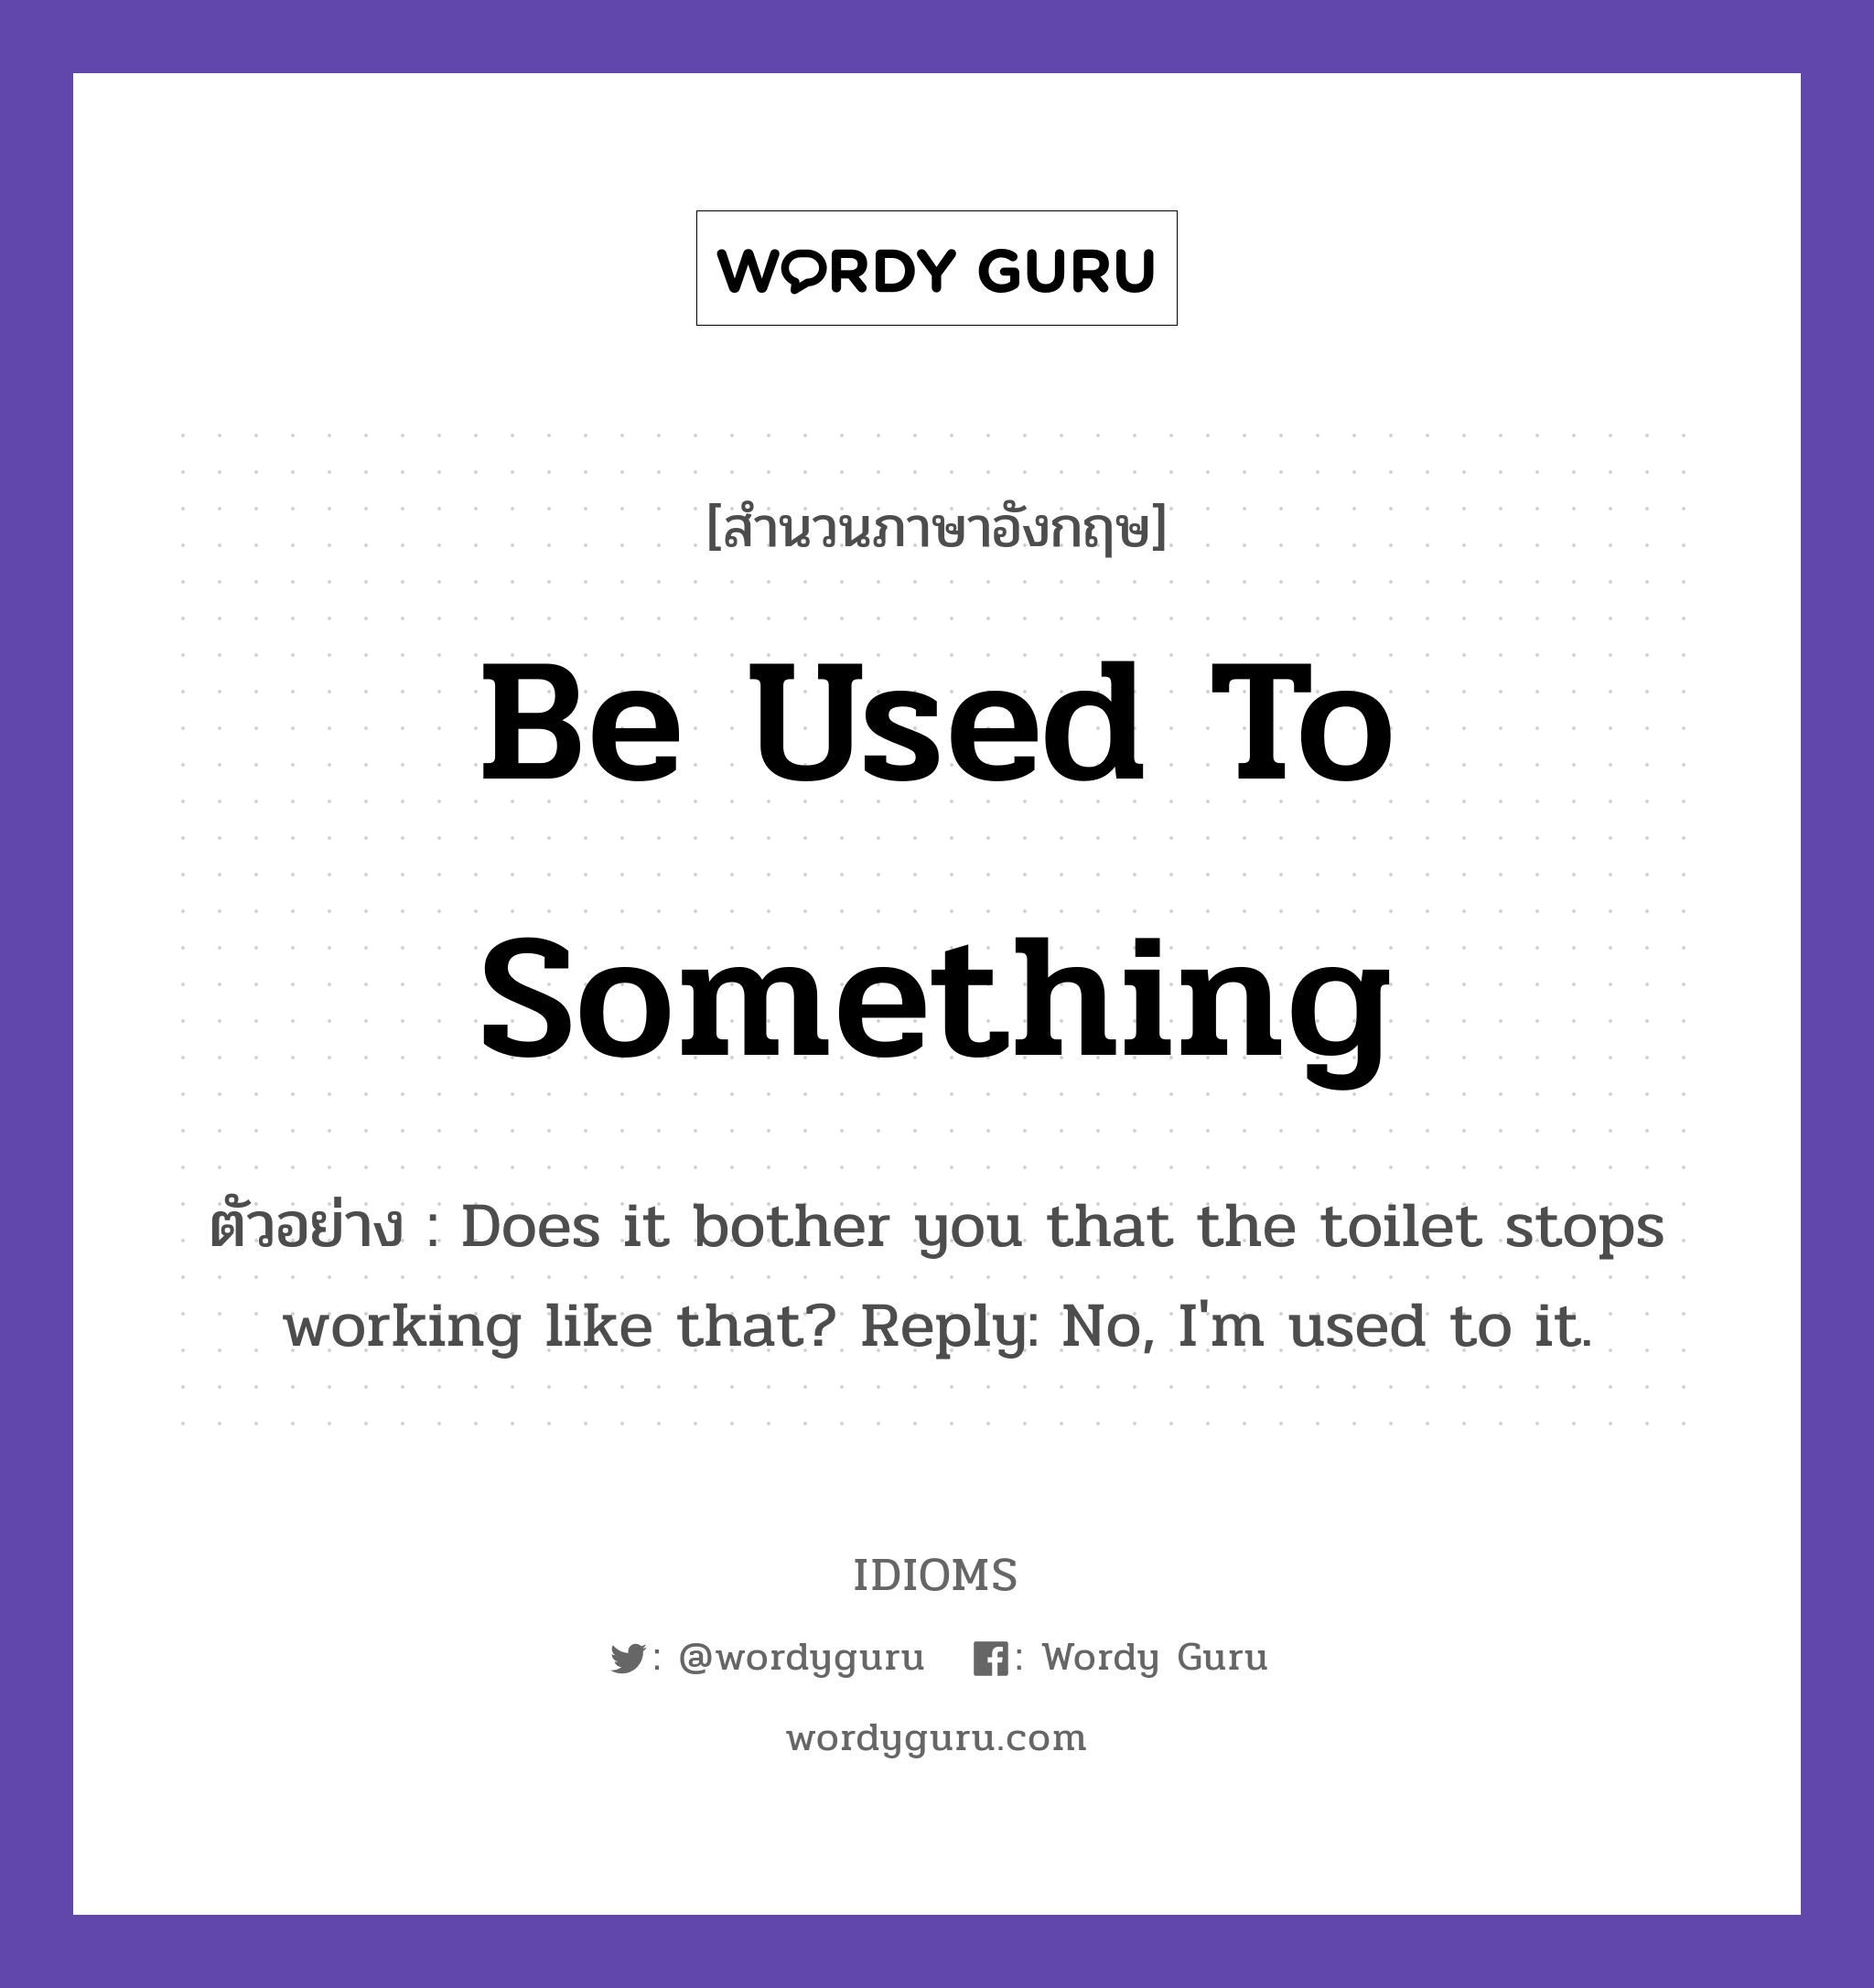 Be Used To Something แปลว่า?, สำนวนภาษาอังกฤษ Be Used To Something ตัวอย่าง Does it bother you that the toilet stops working like that? Reply: No, I'm used to it.